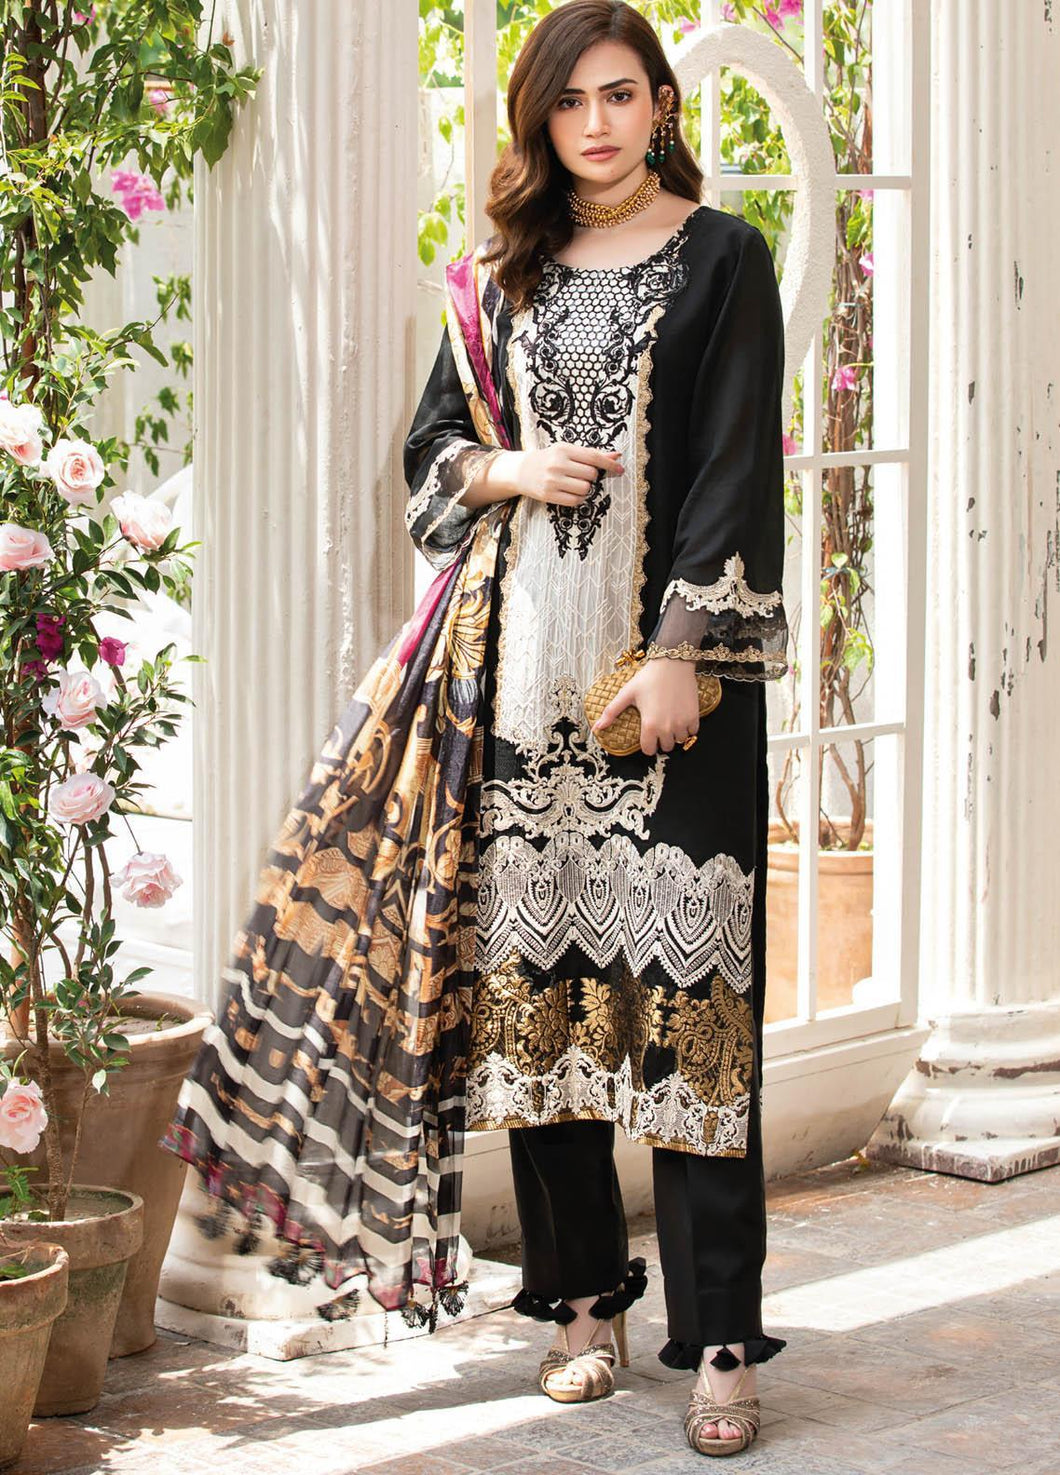 Buy Manara Luxury Lawn 2021, Black from Lebaasonline Pakistani Clothes Stockist in the UK best price- SALE ! Shop Noor LAWN 2021, Maria B Lawn 2021 Summer Suits, Pakistani Clothes Online UK for Wedding, Party & Bridal Wear. Indian & Pakistani Summer Dresses by Manara Luxury Lawn 2021 in the UK & USA at LebaasOnline